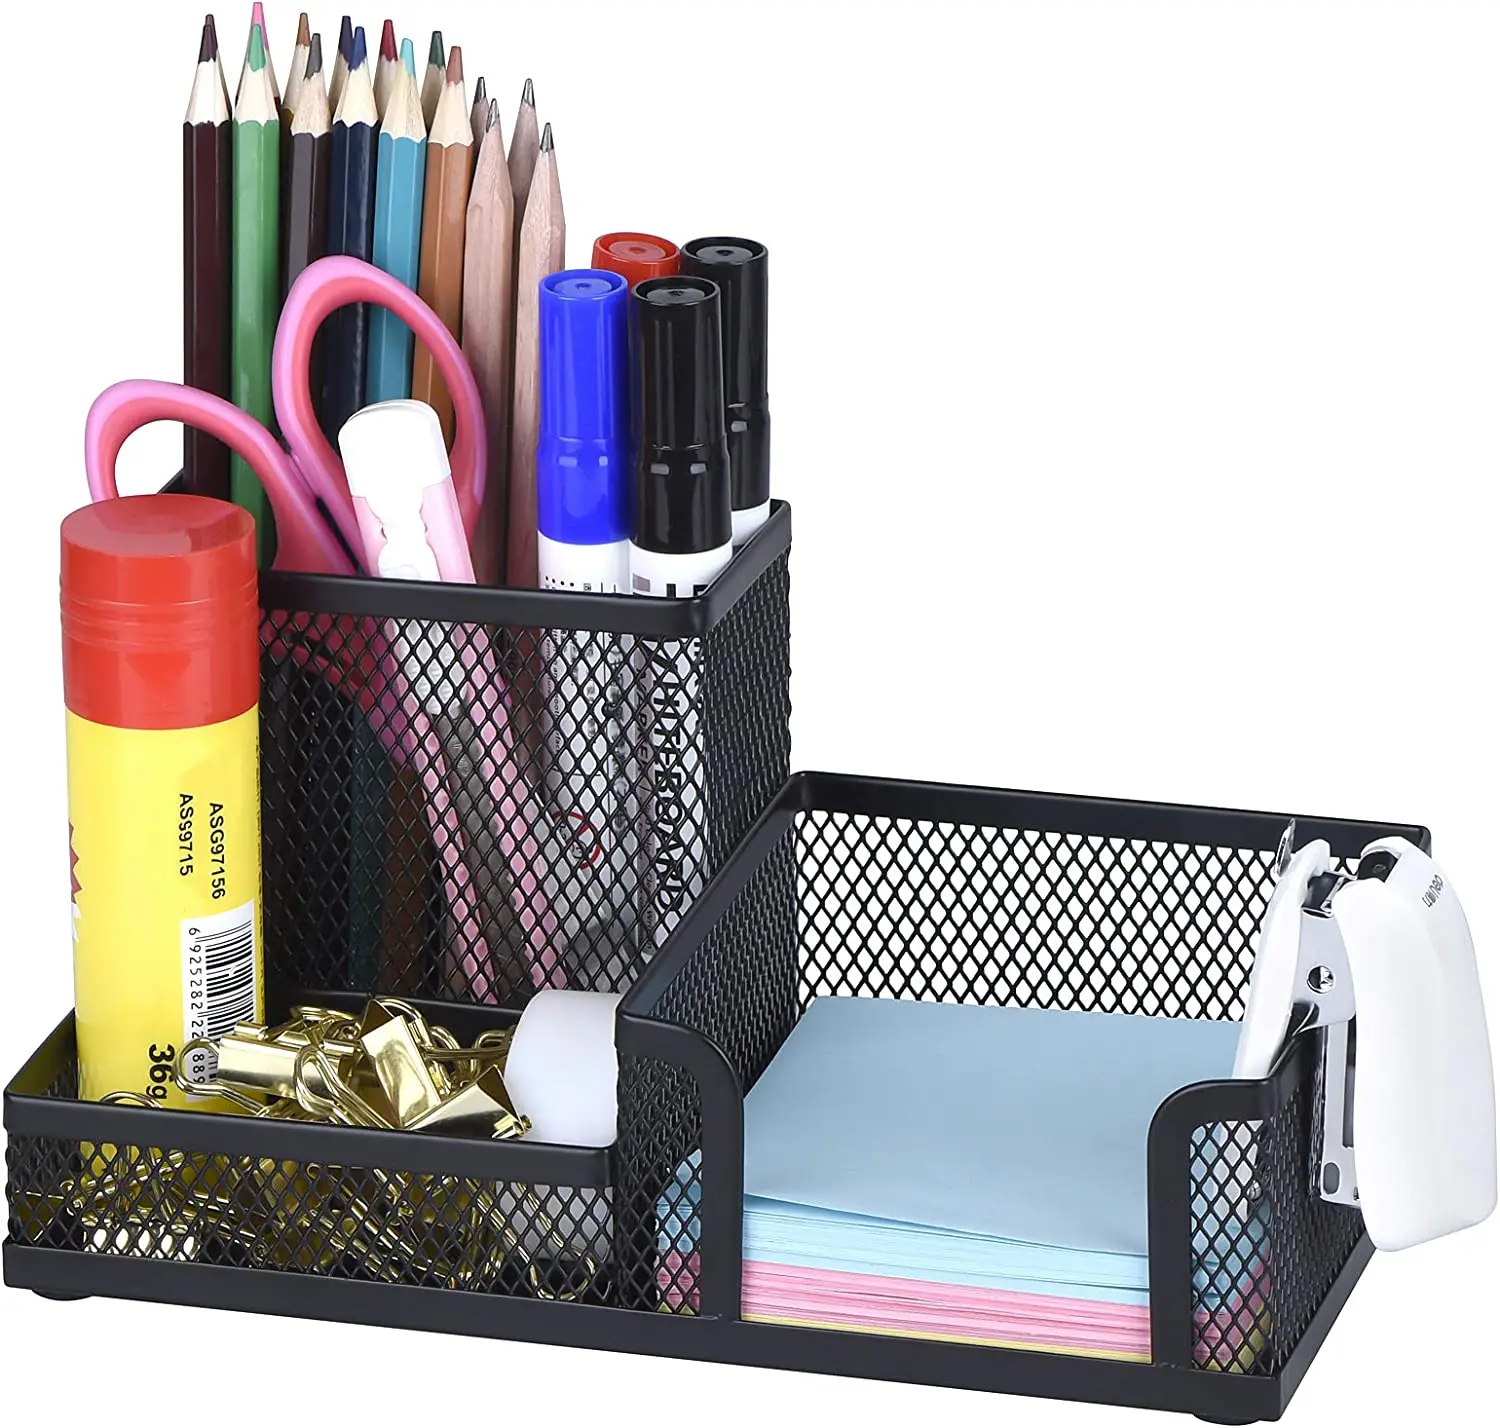 Black Pen Holder, Mesh Office Supplies Accessories Caddy with Sticky Notes Holder, Desk Organizer for Home, Office and School